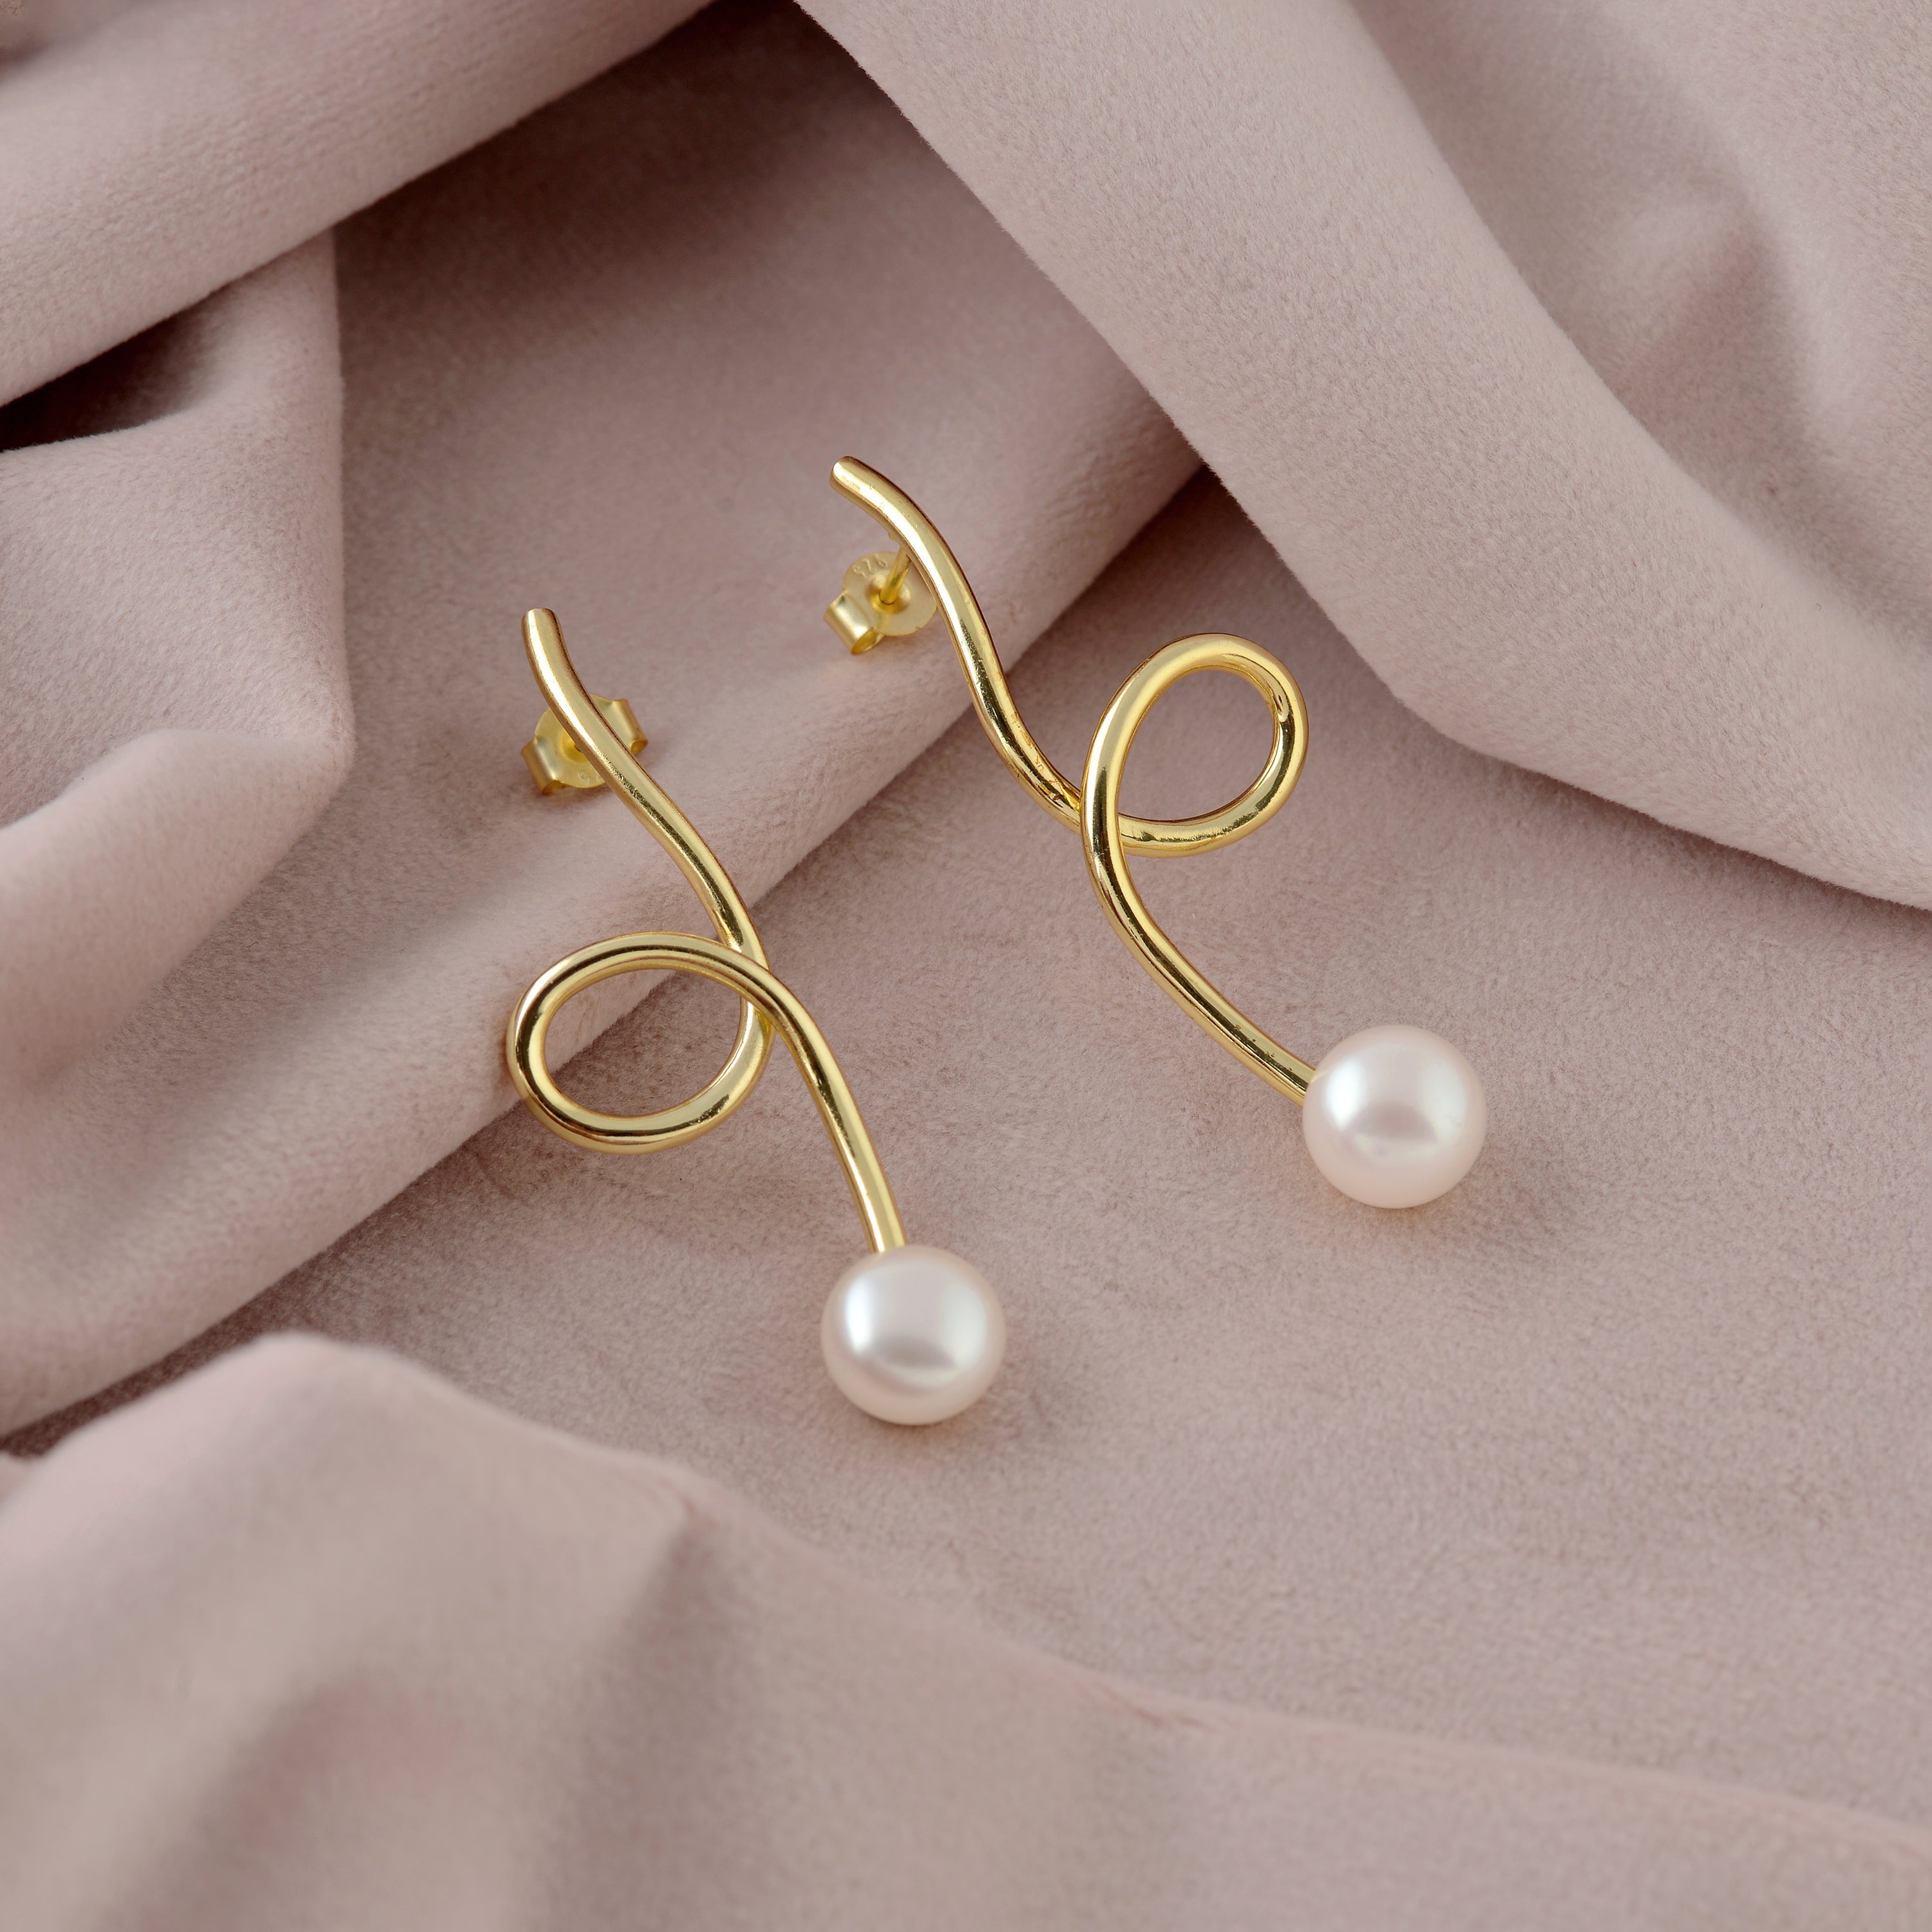 Pearl Earrings with Yellow Gold Polish - Krishna Jewellers Pearls and Gems